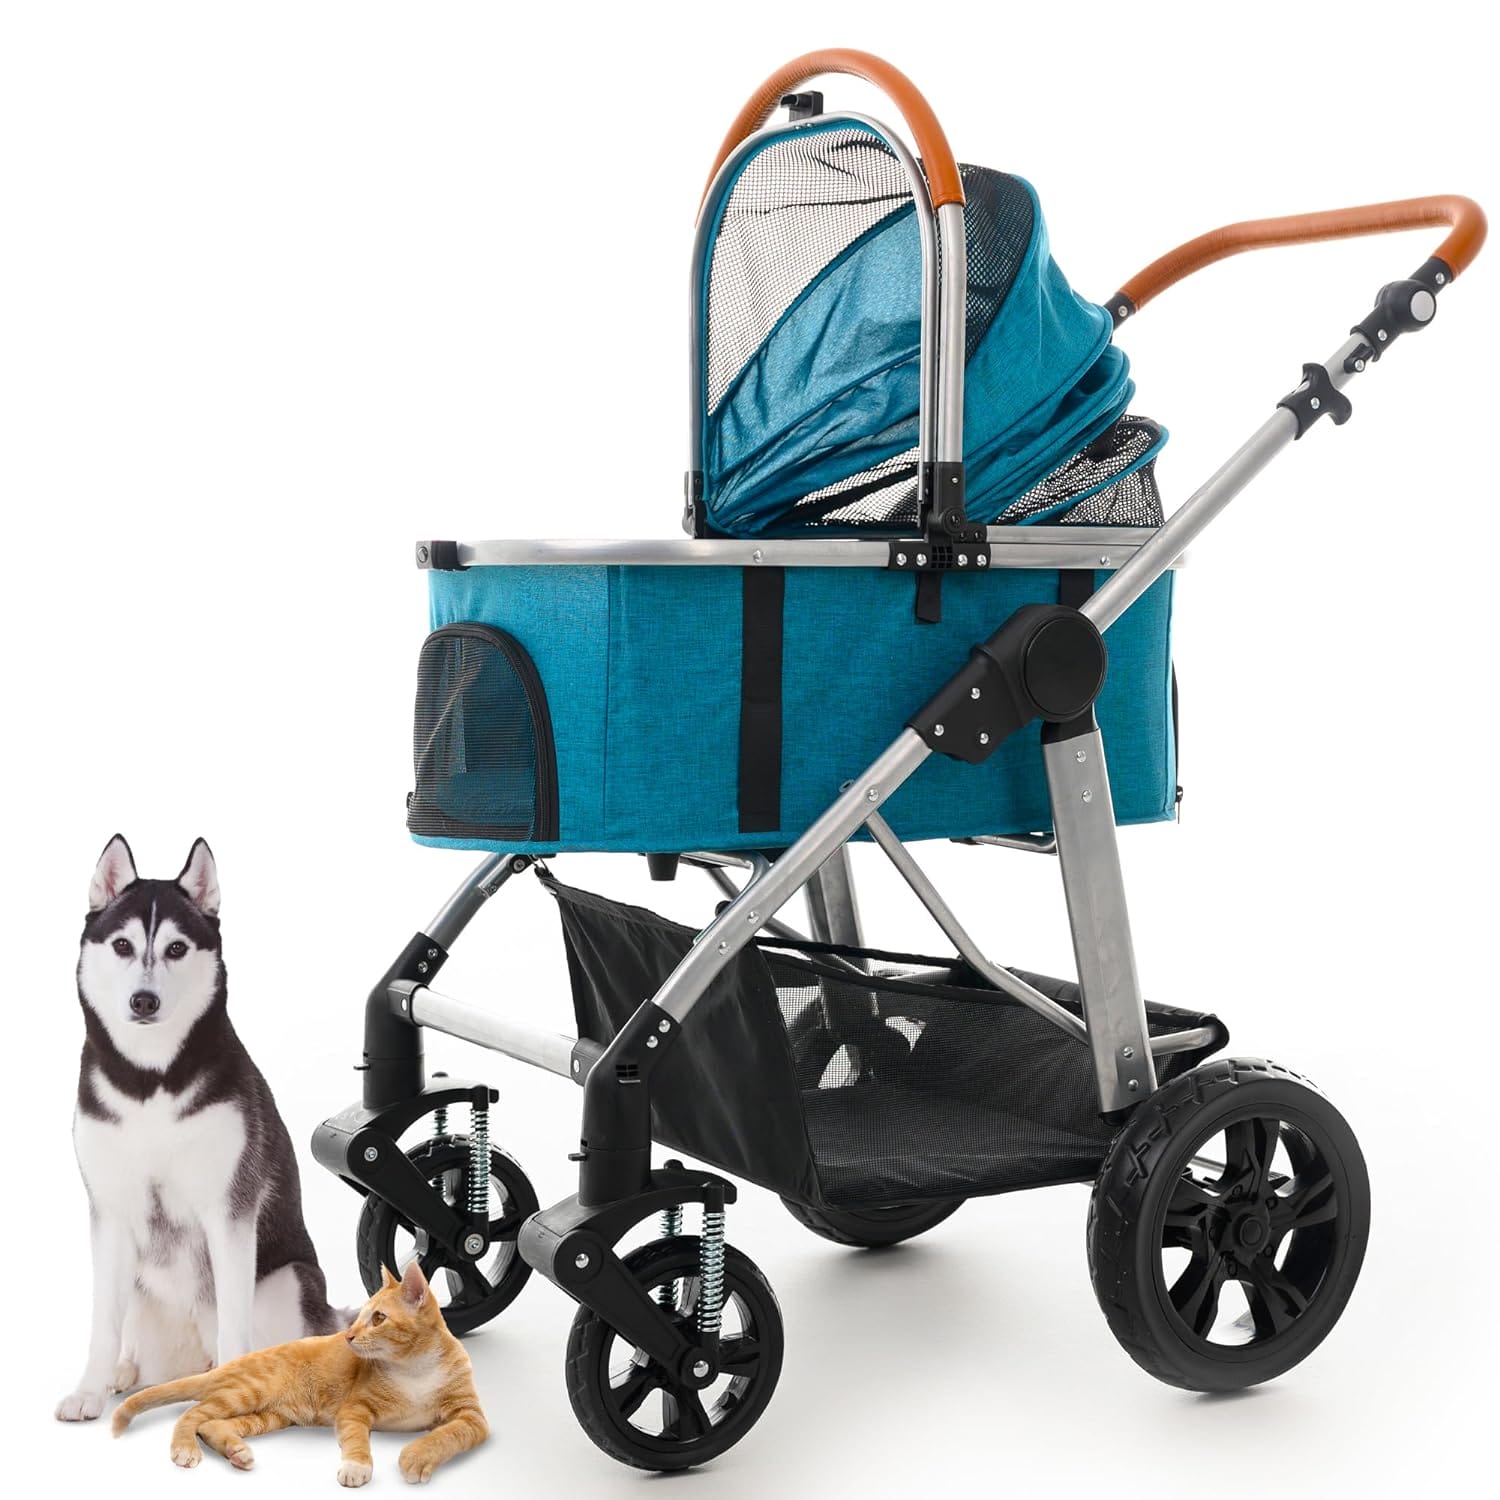 Pet Travel System Review